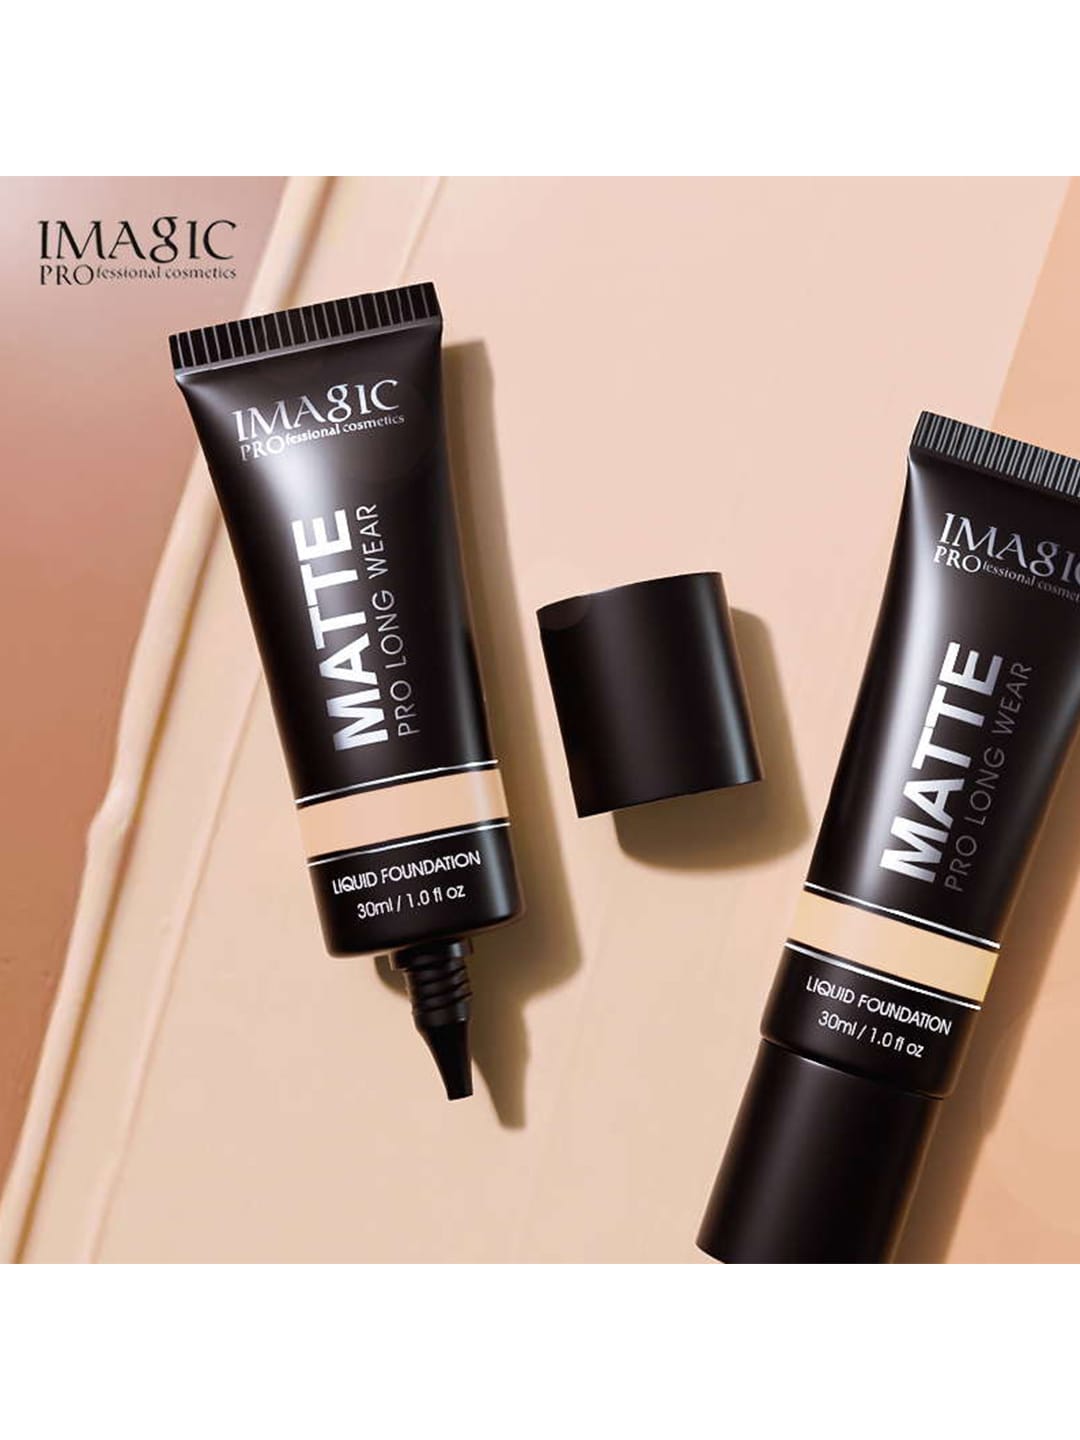 IMAGIC Matte Pro Long Wear Foundation-Natural 30ml Price in India